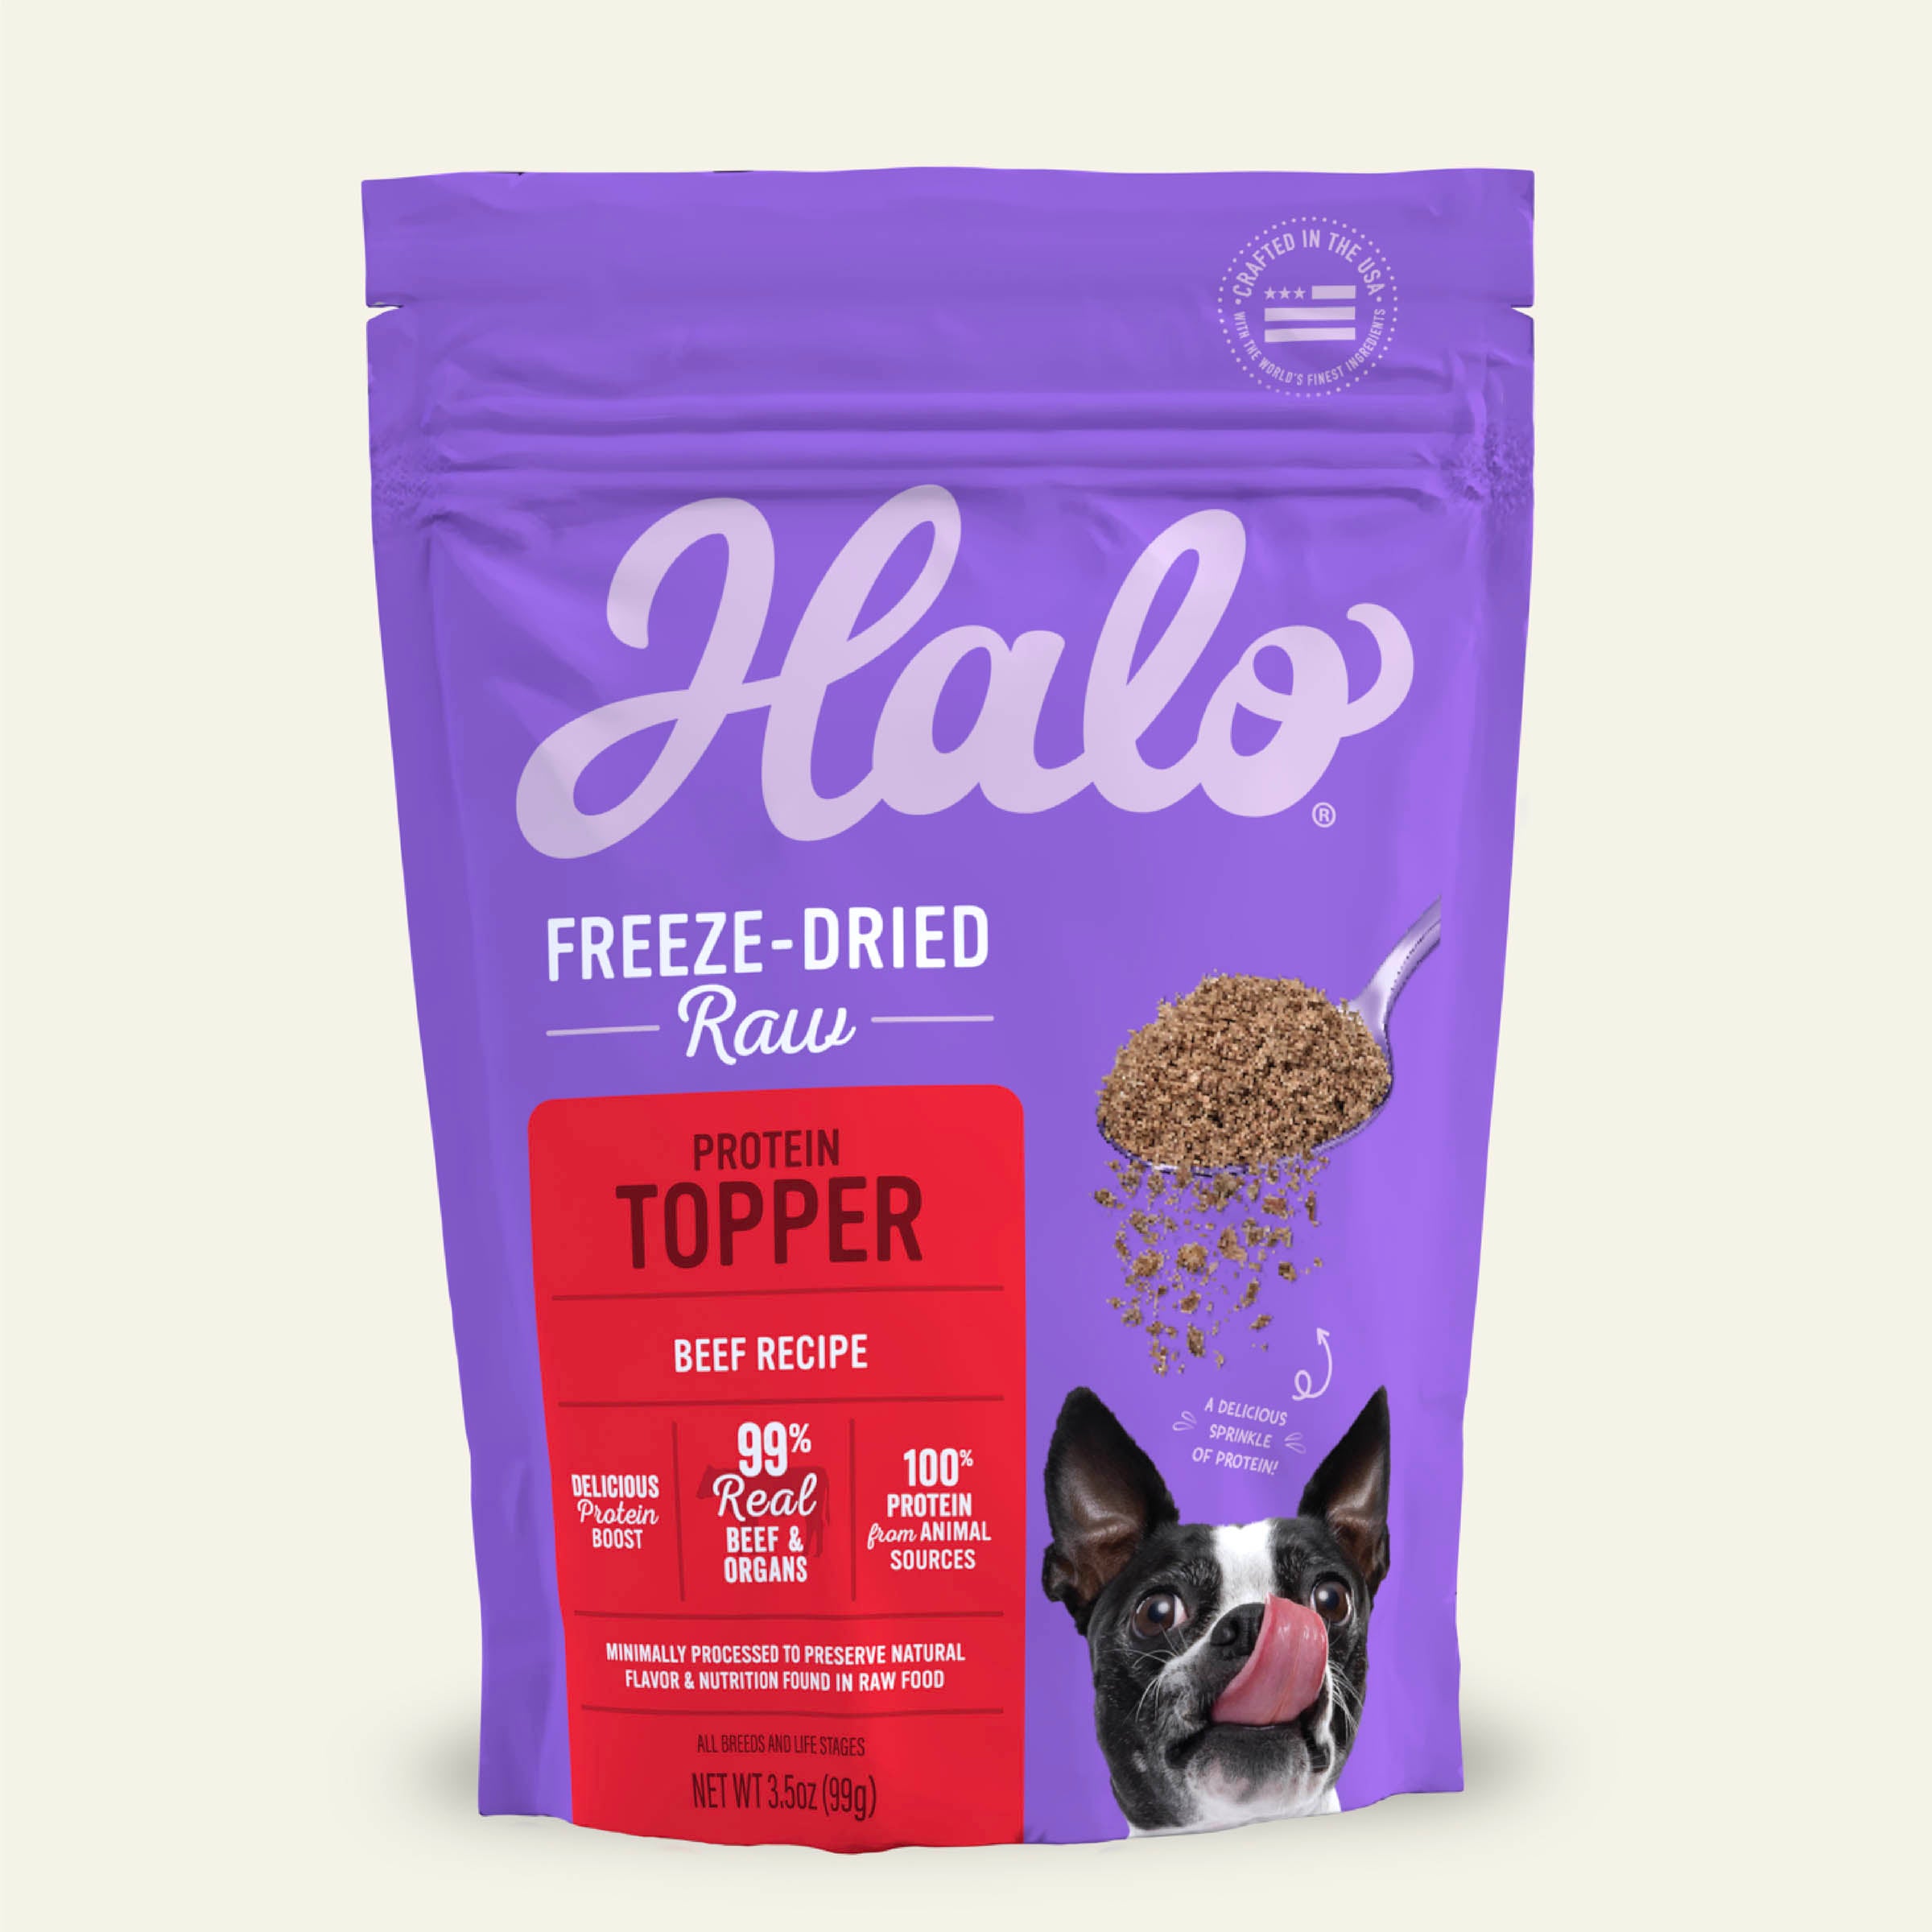 Image of Halo Freeze-Dried Raw Beef Protein Topper 3.5oz bag